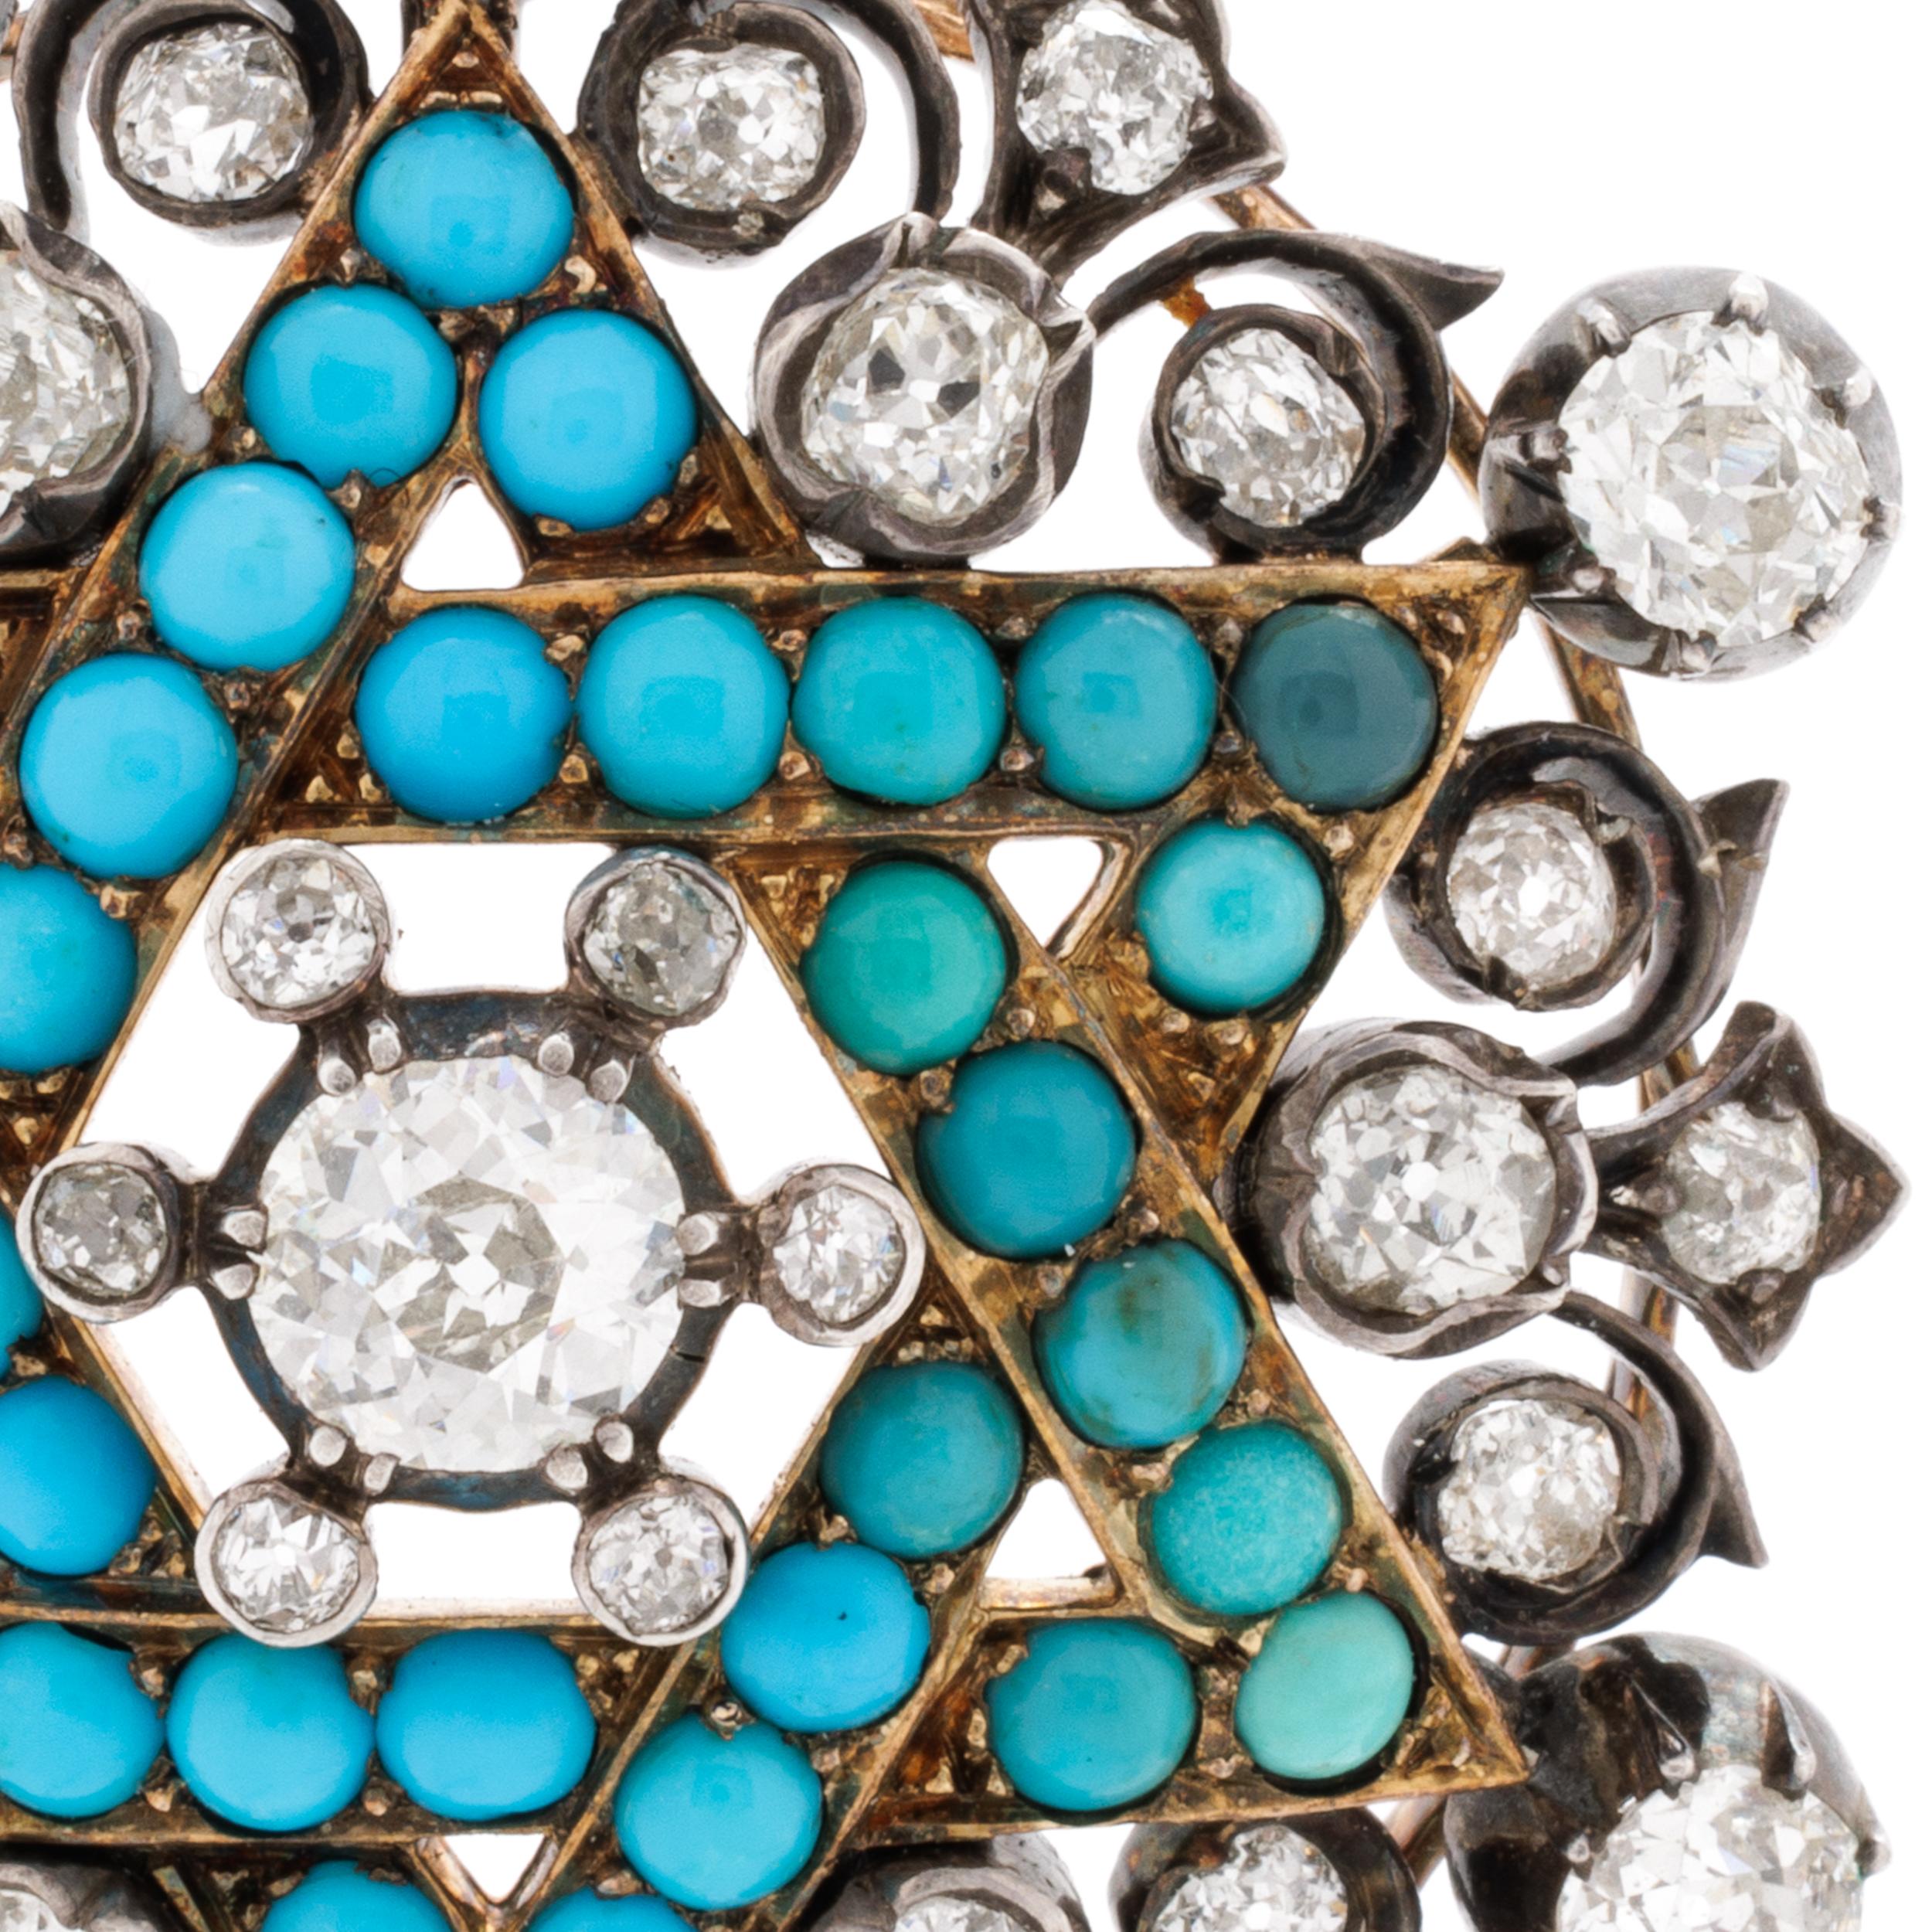 Rare Victorian 15-18K Yellow Gold, Silver, Diamond and Persian Turquoise Star of David

Rare Mid-19th Century 5.0 carats Old Mine Cut Diamonds and Persian Turquoise Star of David Pendant. 

Between the span of the Victorian era and our present day,